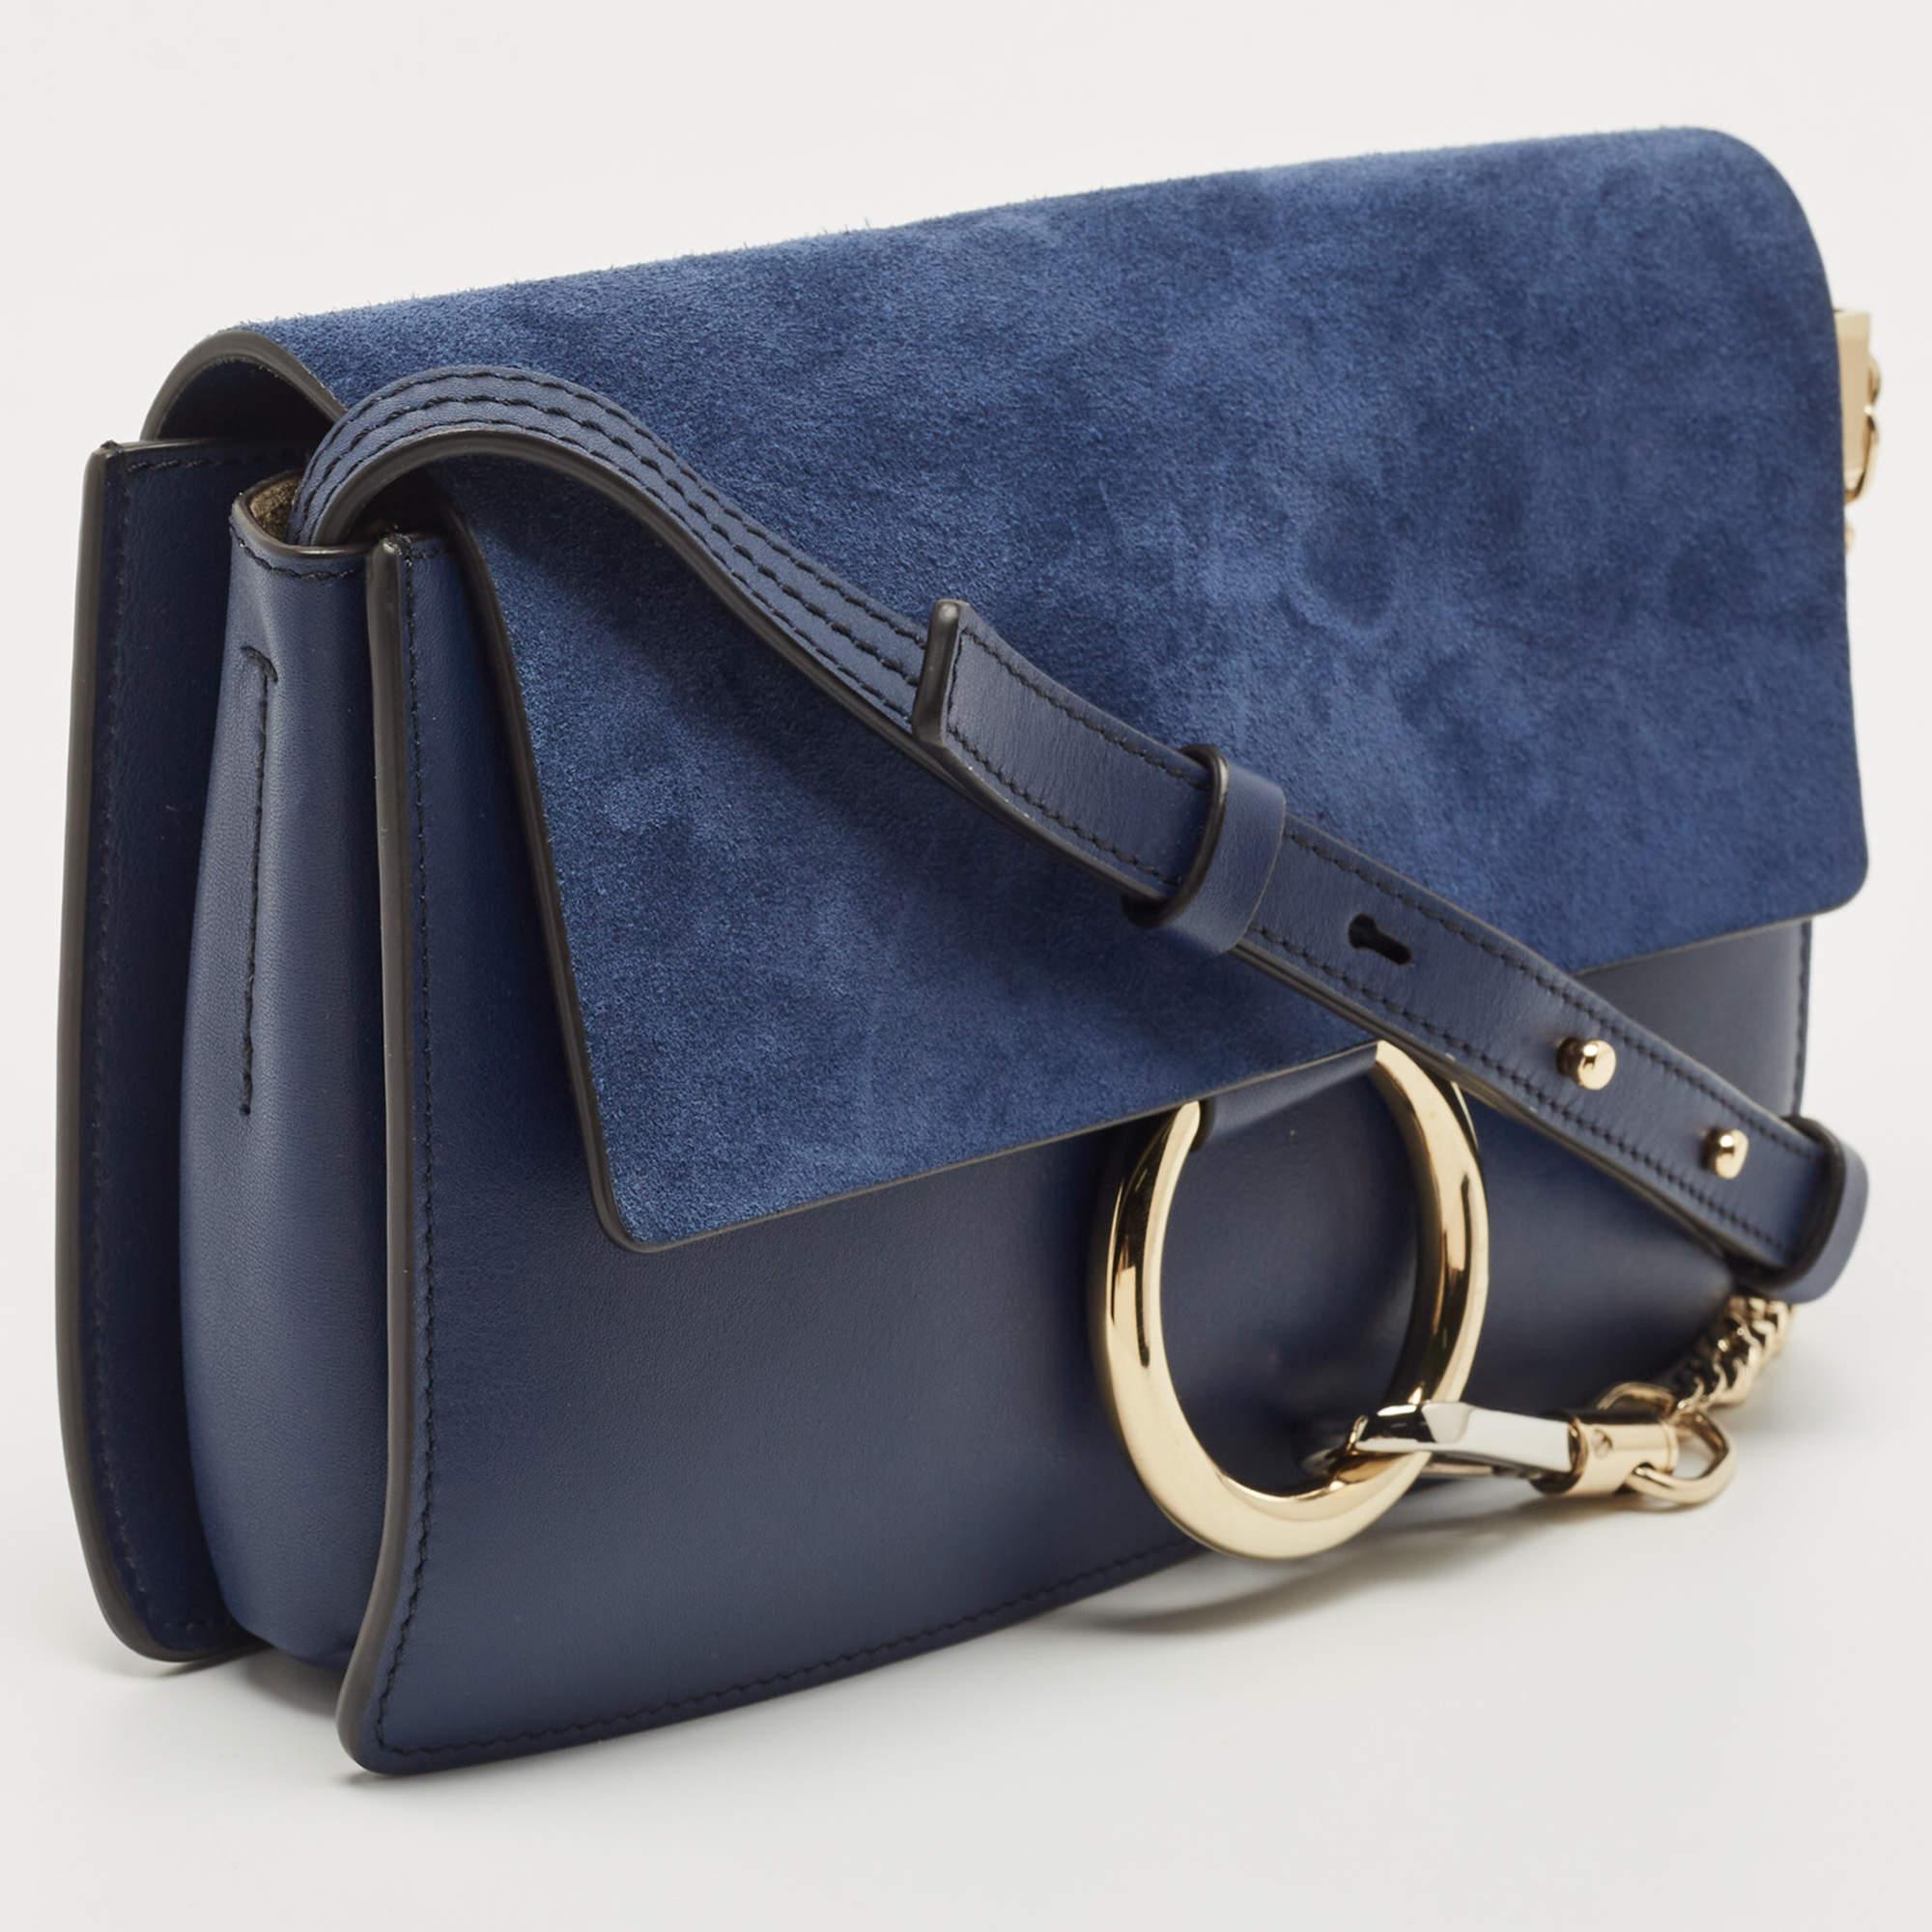 Black Chloe Navy Blue Leather and Suede Small Faye Shoulder Bag